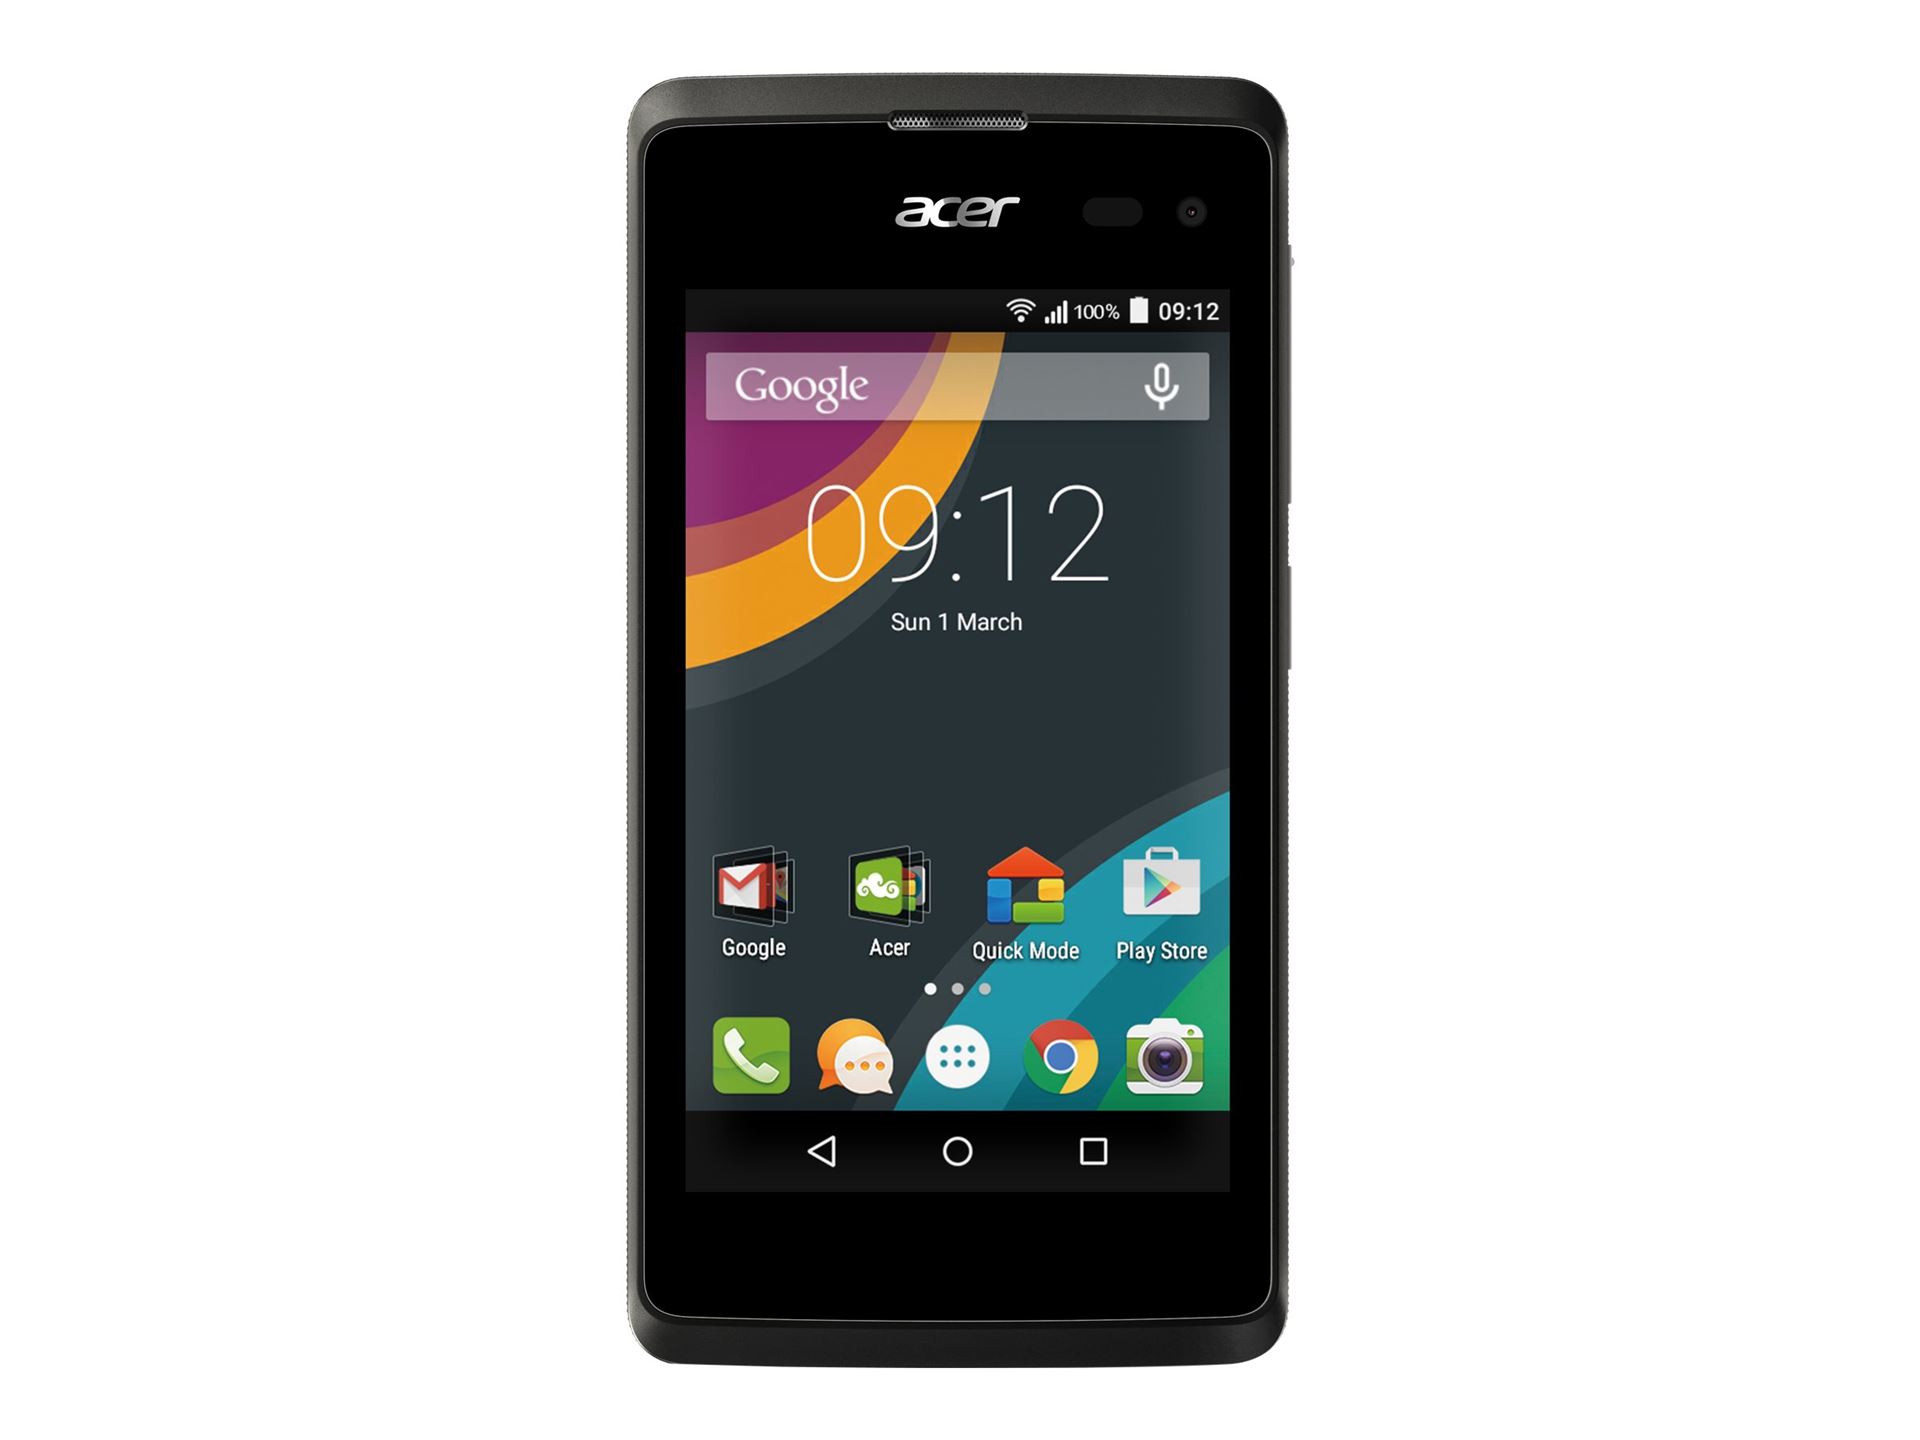 Acer Liquid Z220 - Black - 3G HSPA+ - 8GB - GSM - Android Smartphone ...